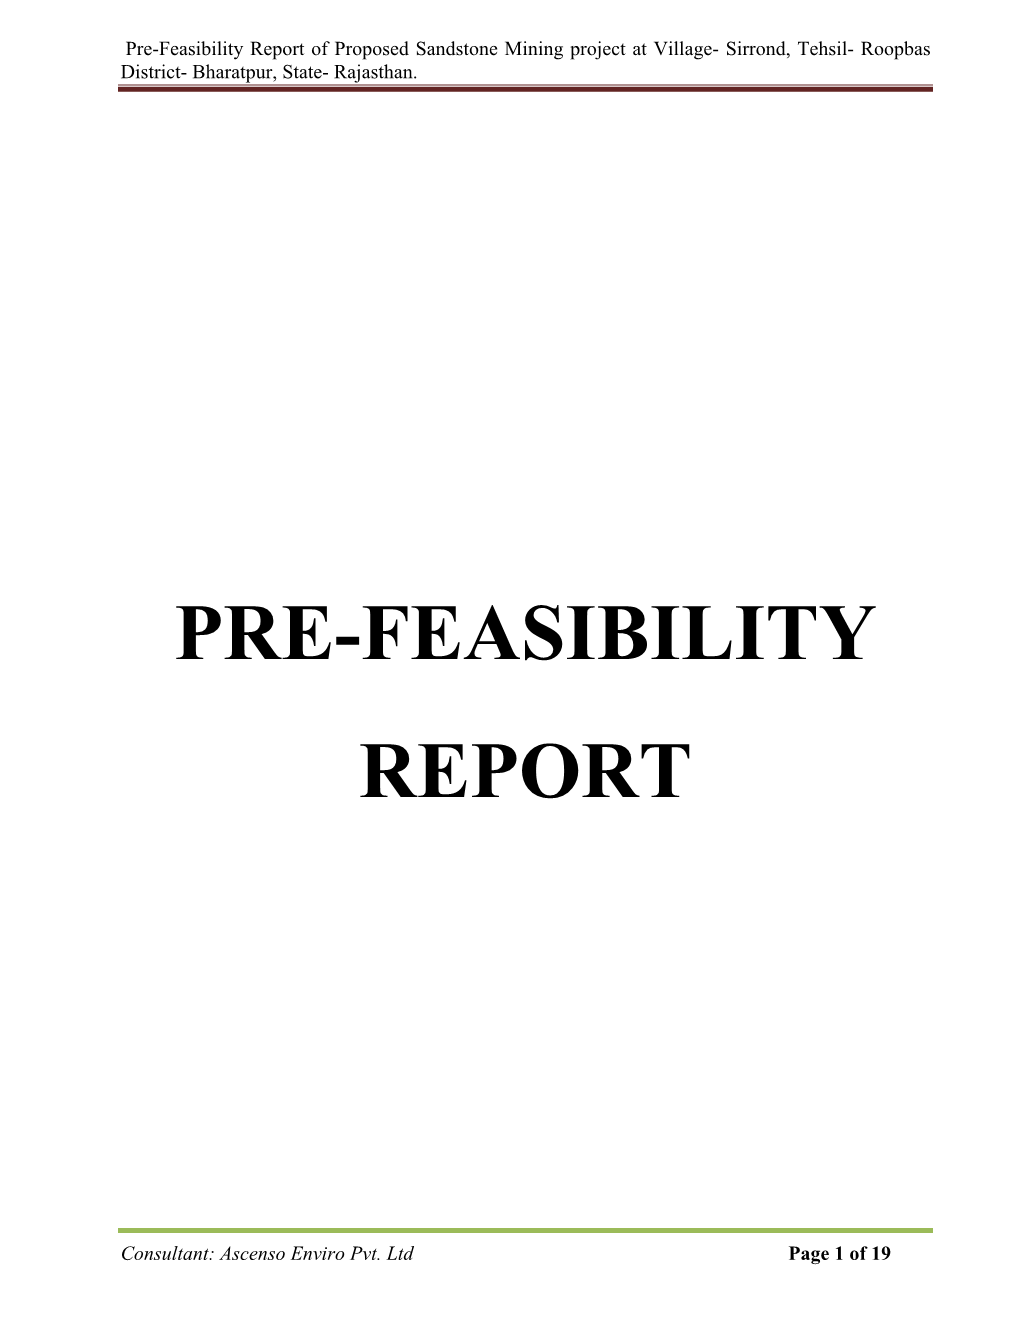 Pre-Feasibility Report of Proposed Sandstone Mining Project at Village- Sirrond, Tehsil- Roopbas District- Bharatpur, State- Rajasthan